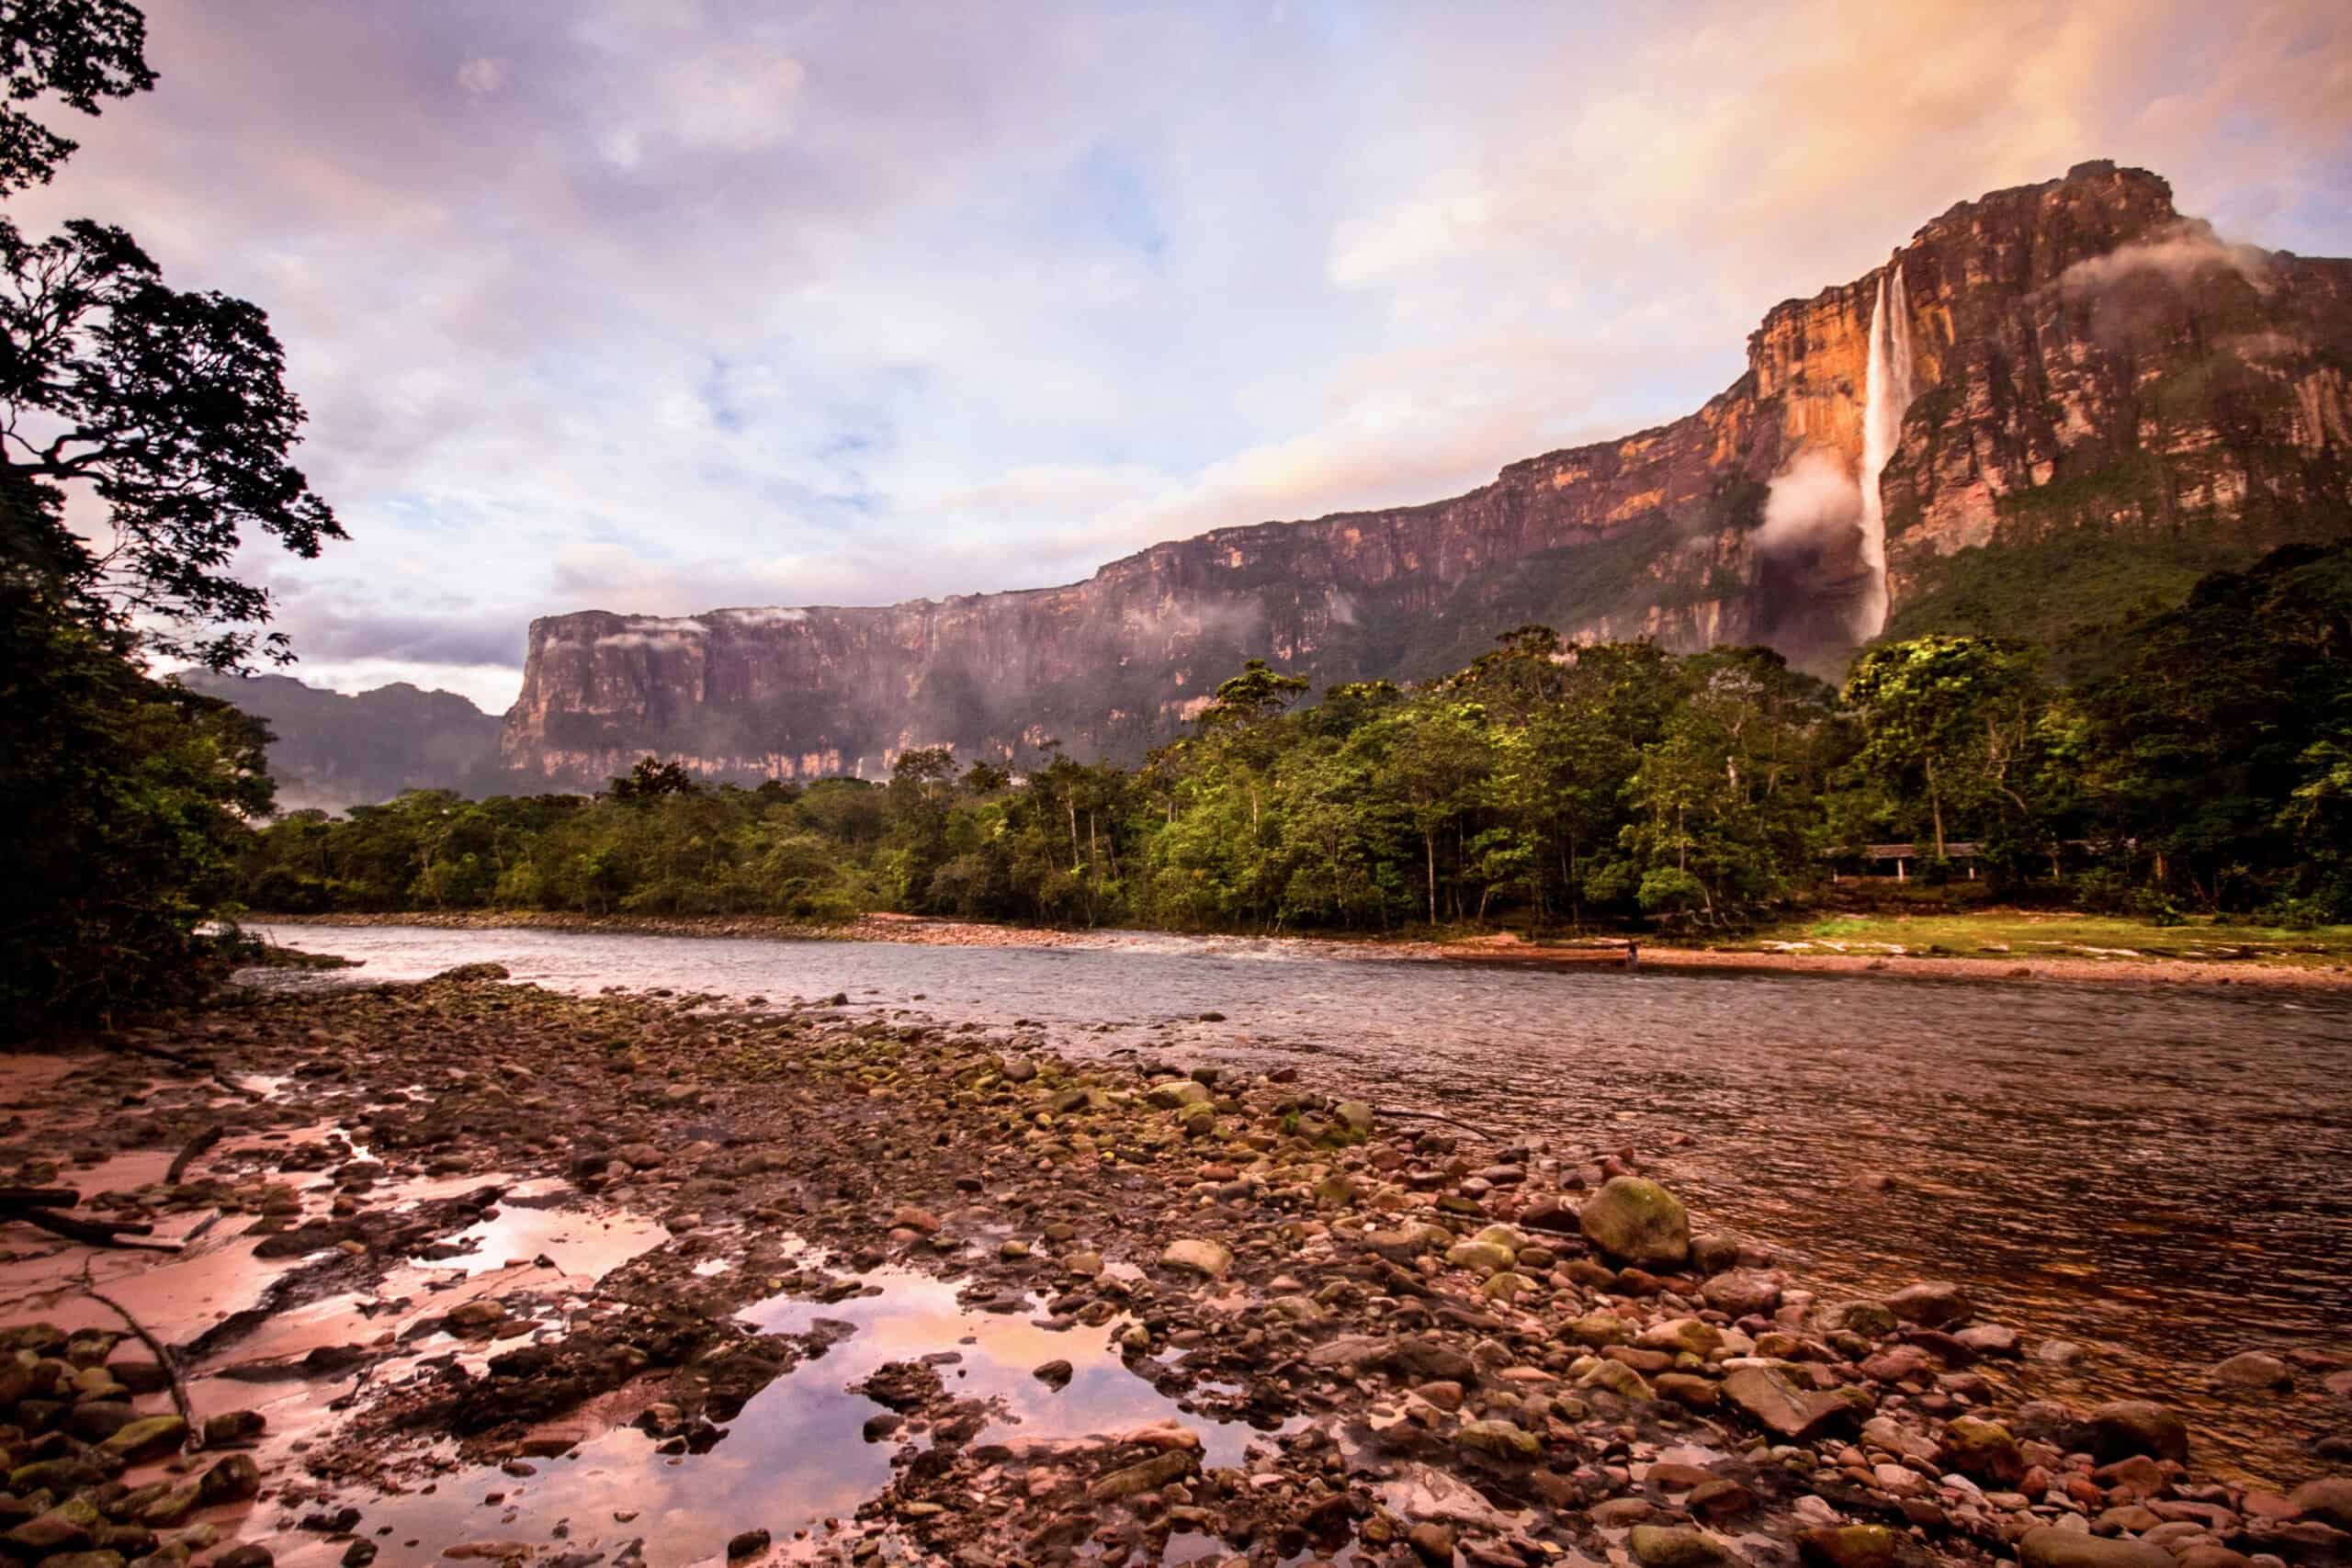 <p>Located in Venezuela’s Canaima National Park, Angel Falls is the world’s tallest uninterrupted waterfall, plunging an extraordinary 3,212 feet from the Auyán-tepui mountain. Named after aviator Jimmie Angel, who first flew over it in 1933, the falls are fed by the Churún River and create a mist that nourishes the lush rainforest below. </p> <p>Known as “Kerepakupai Merú” by the indigenous Pemon people, the falls offer a jaw-dropping spectacle that requires an adventurous journey by plane, boat, and foot to reach. This awe-inspiring natural wonder is a must-visit for thrill-seekers and nature lovers alike this summer.</p>